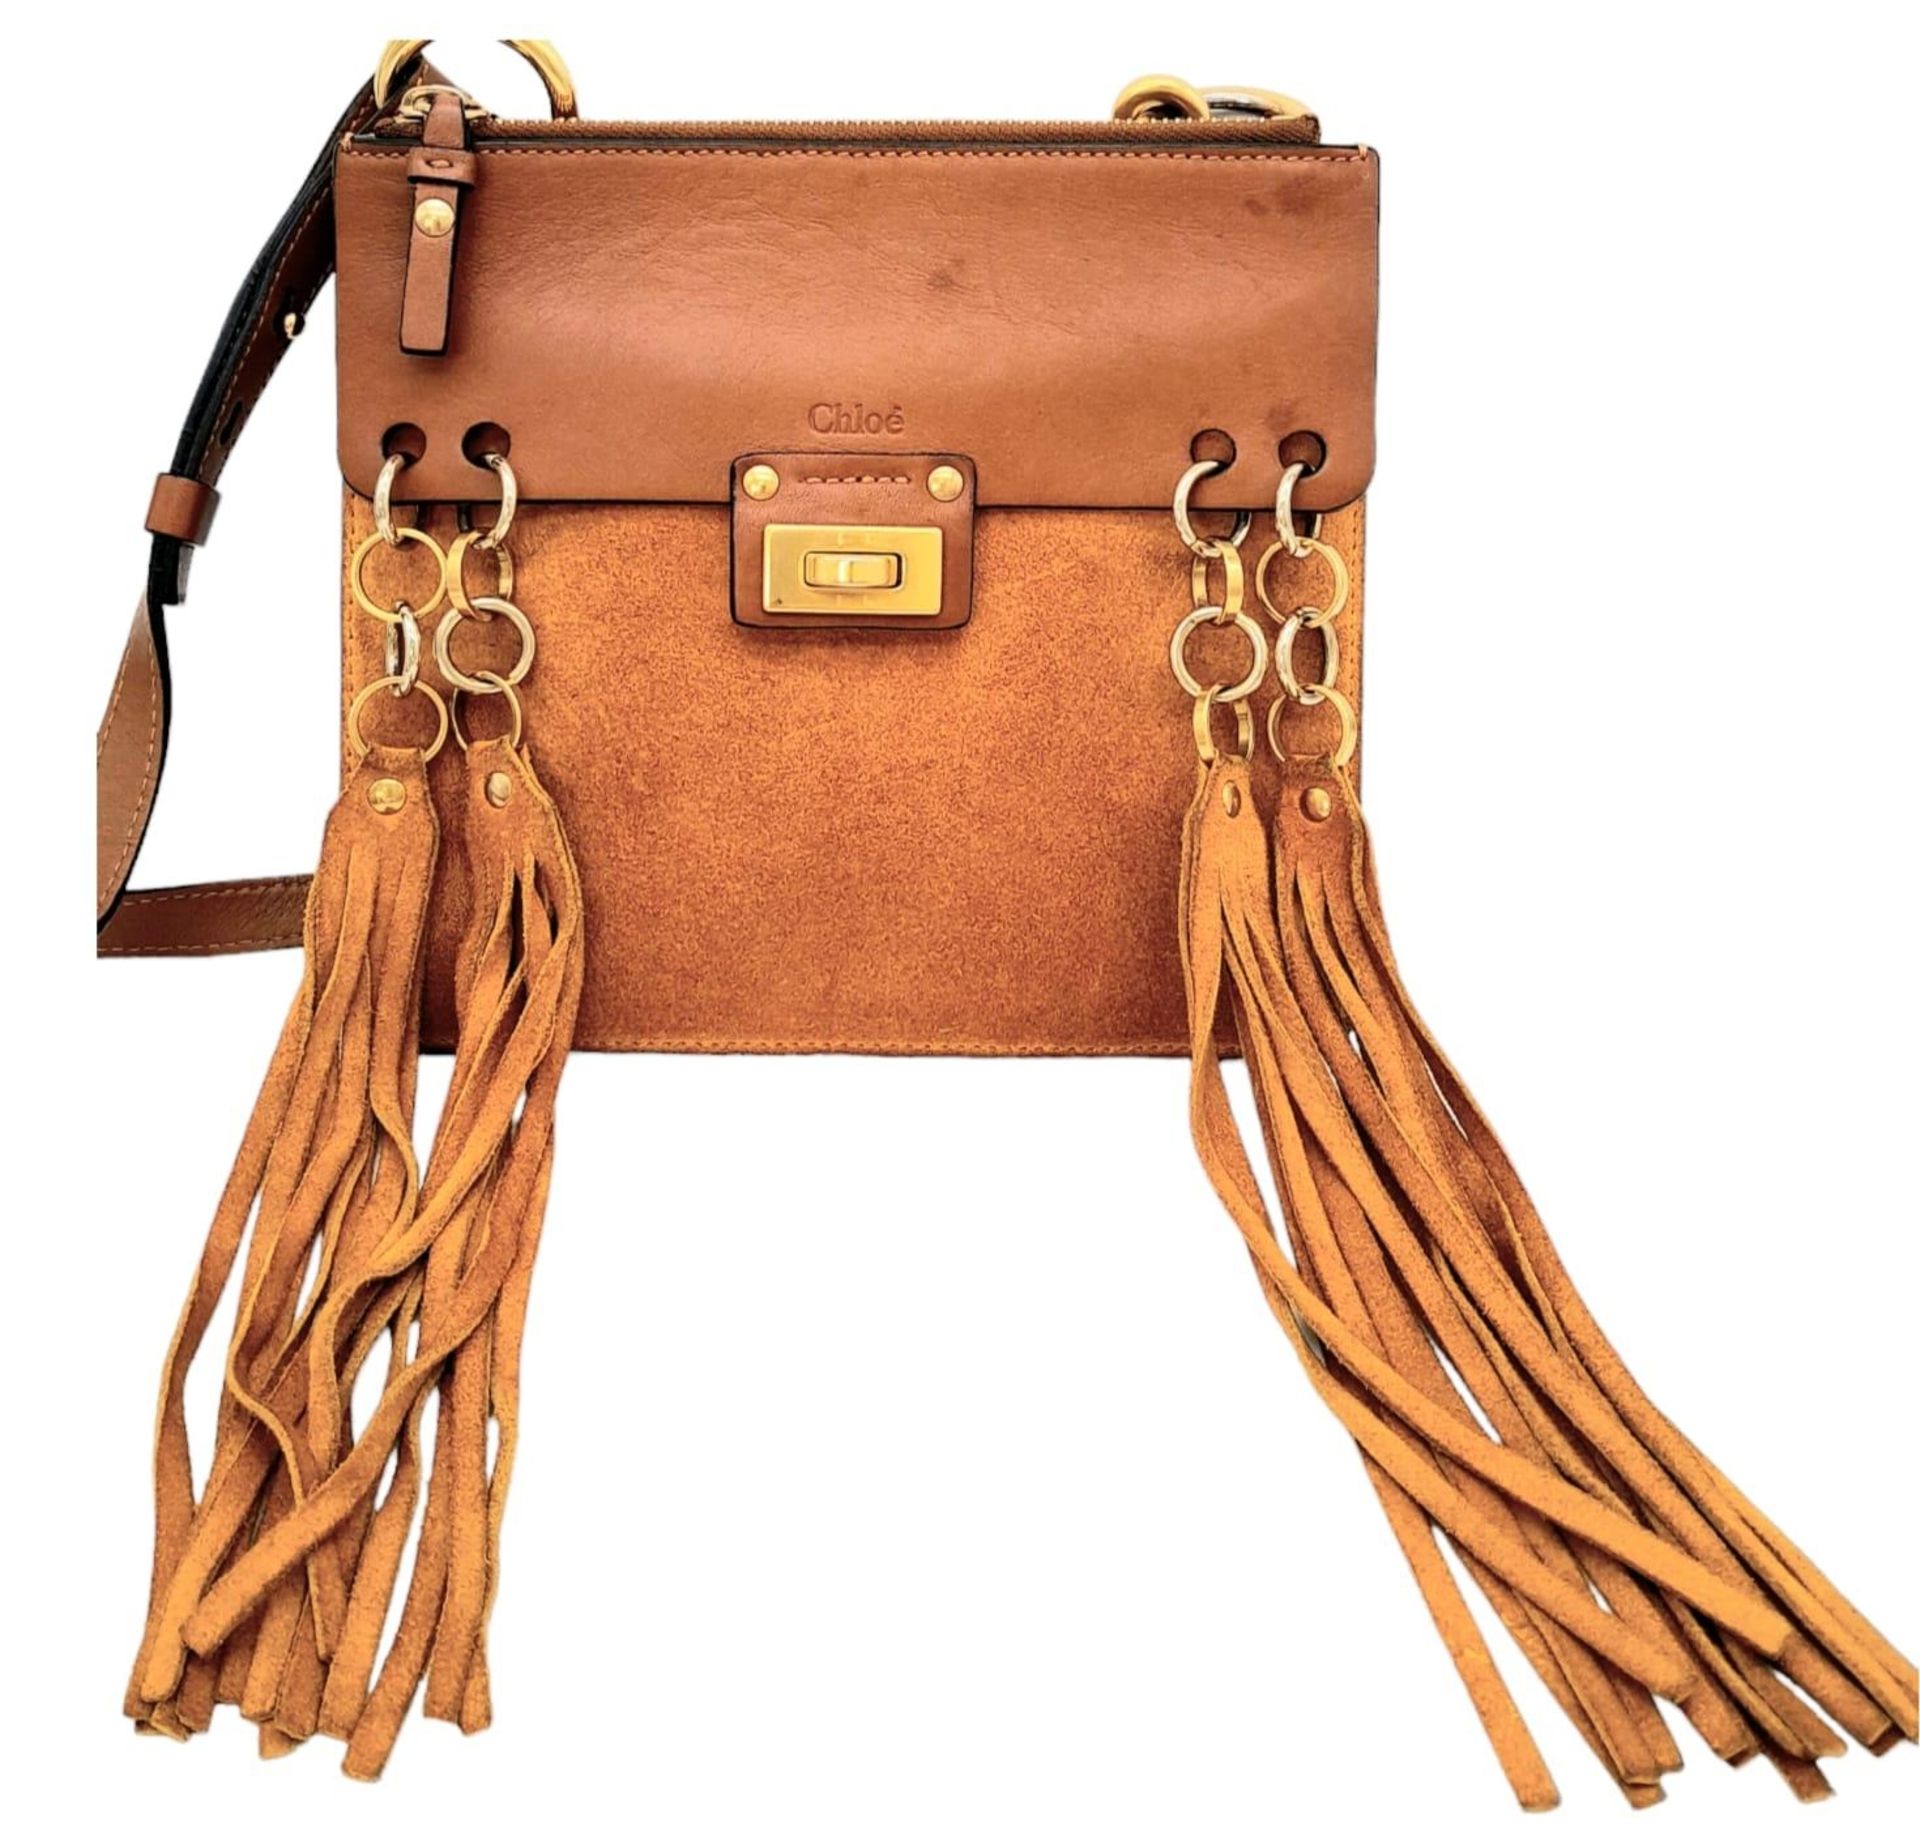 A Chloe Brown and Mustard 'Jane' Shoulder Bag. Leather and suede exterior with gold-toned